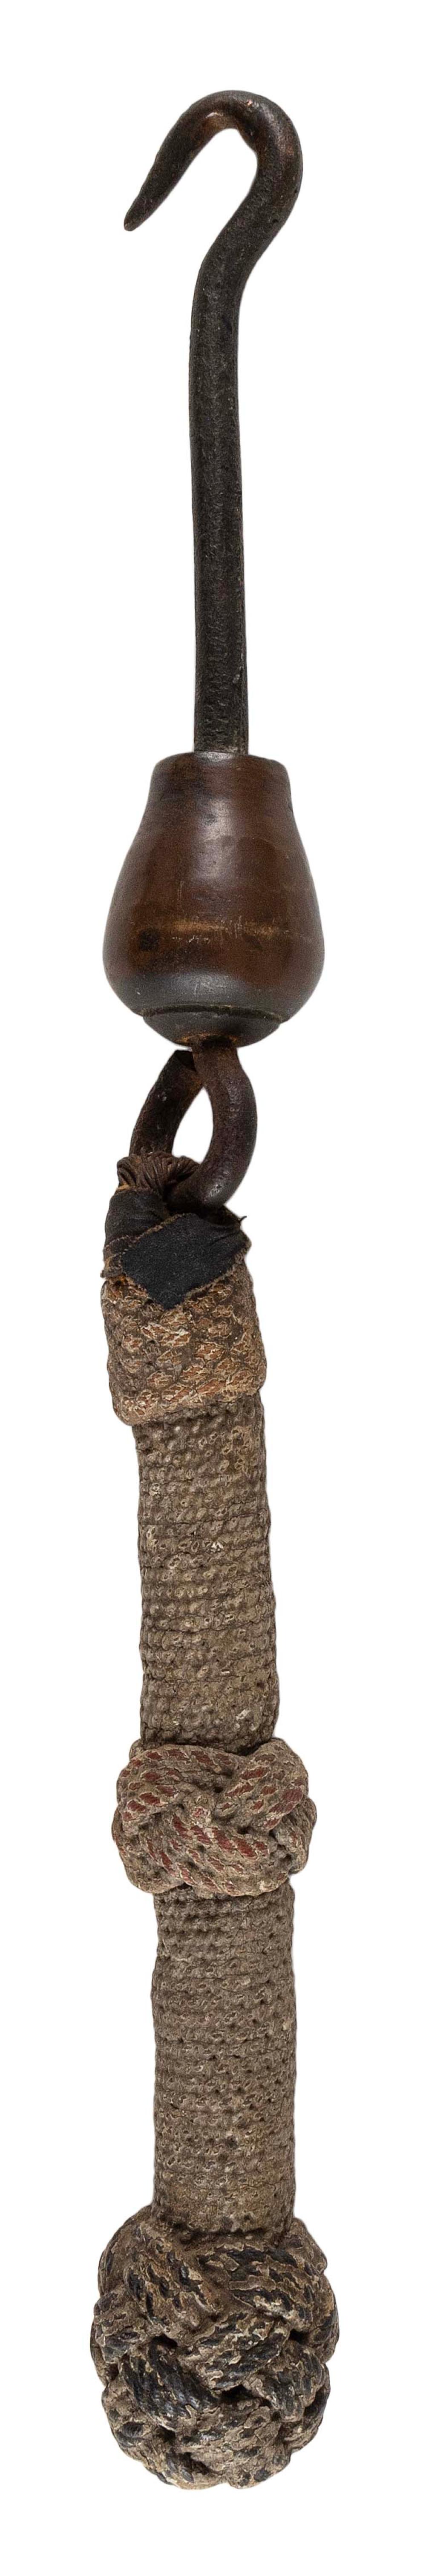 BELL CLAPPER WITH SAILOR'S ROPEWORK